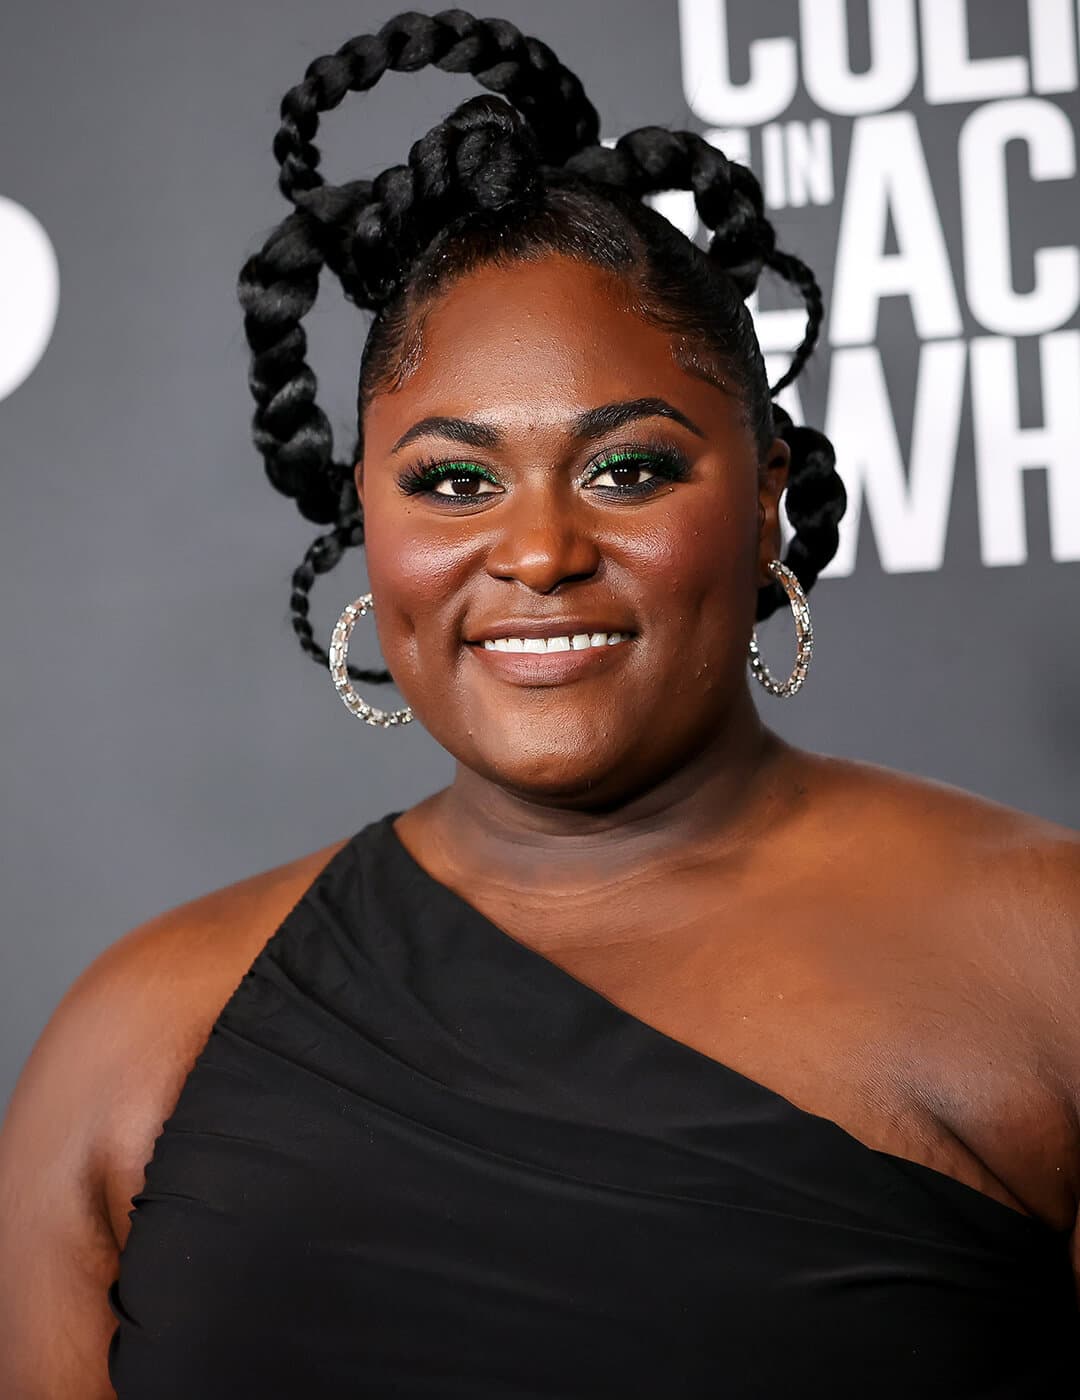 Danielle Brooks rocking a braided loops hairstyle and black dress on the red carpet